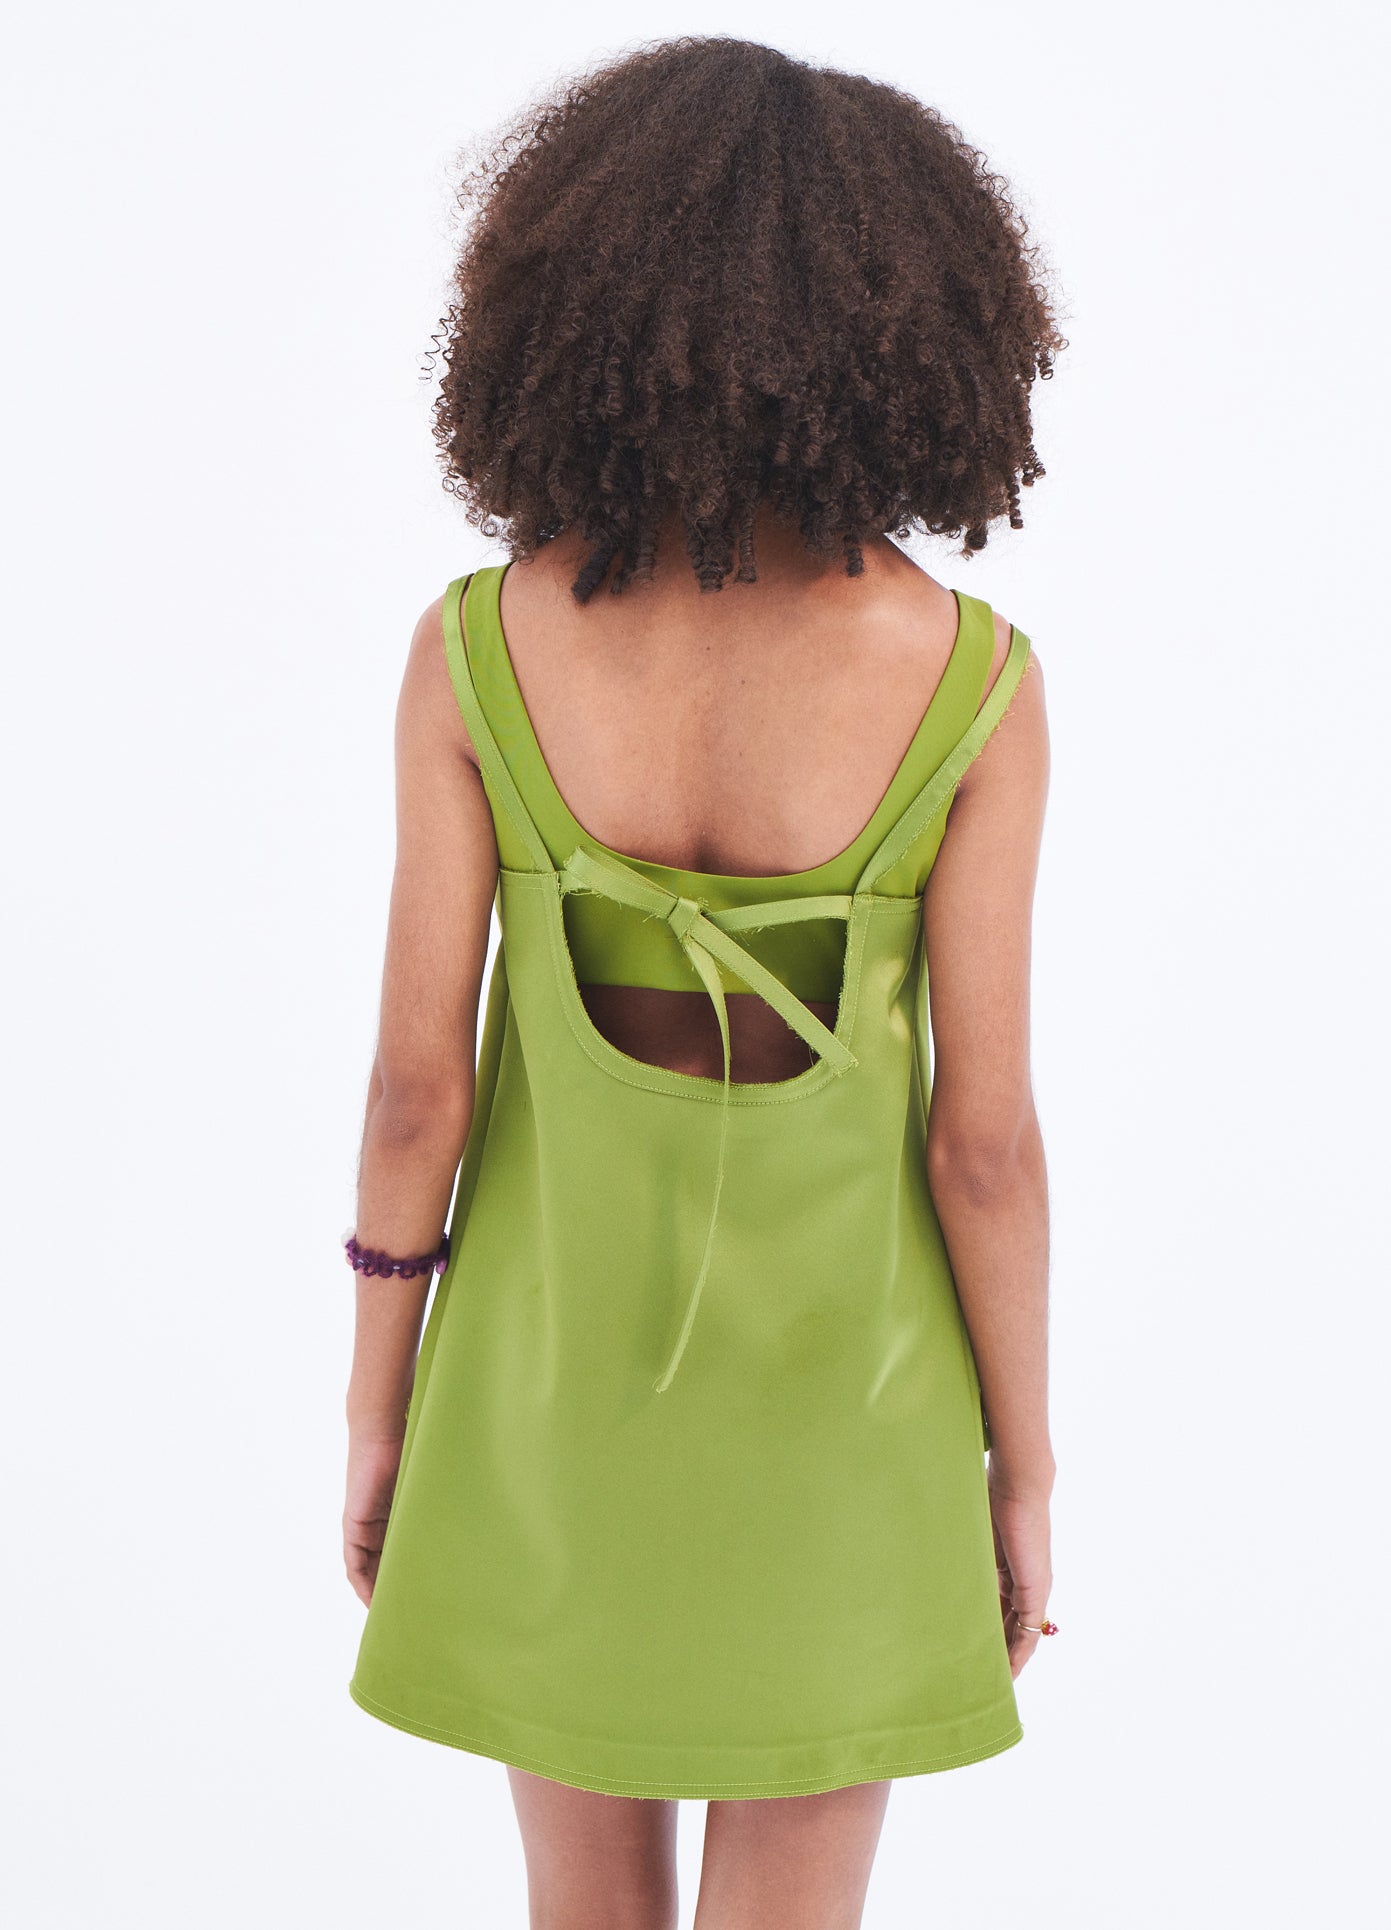 MONSE A-Line Satin Mini Dress in Olive on model back view